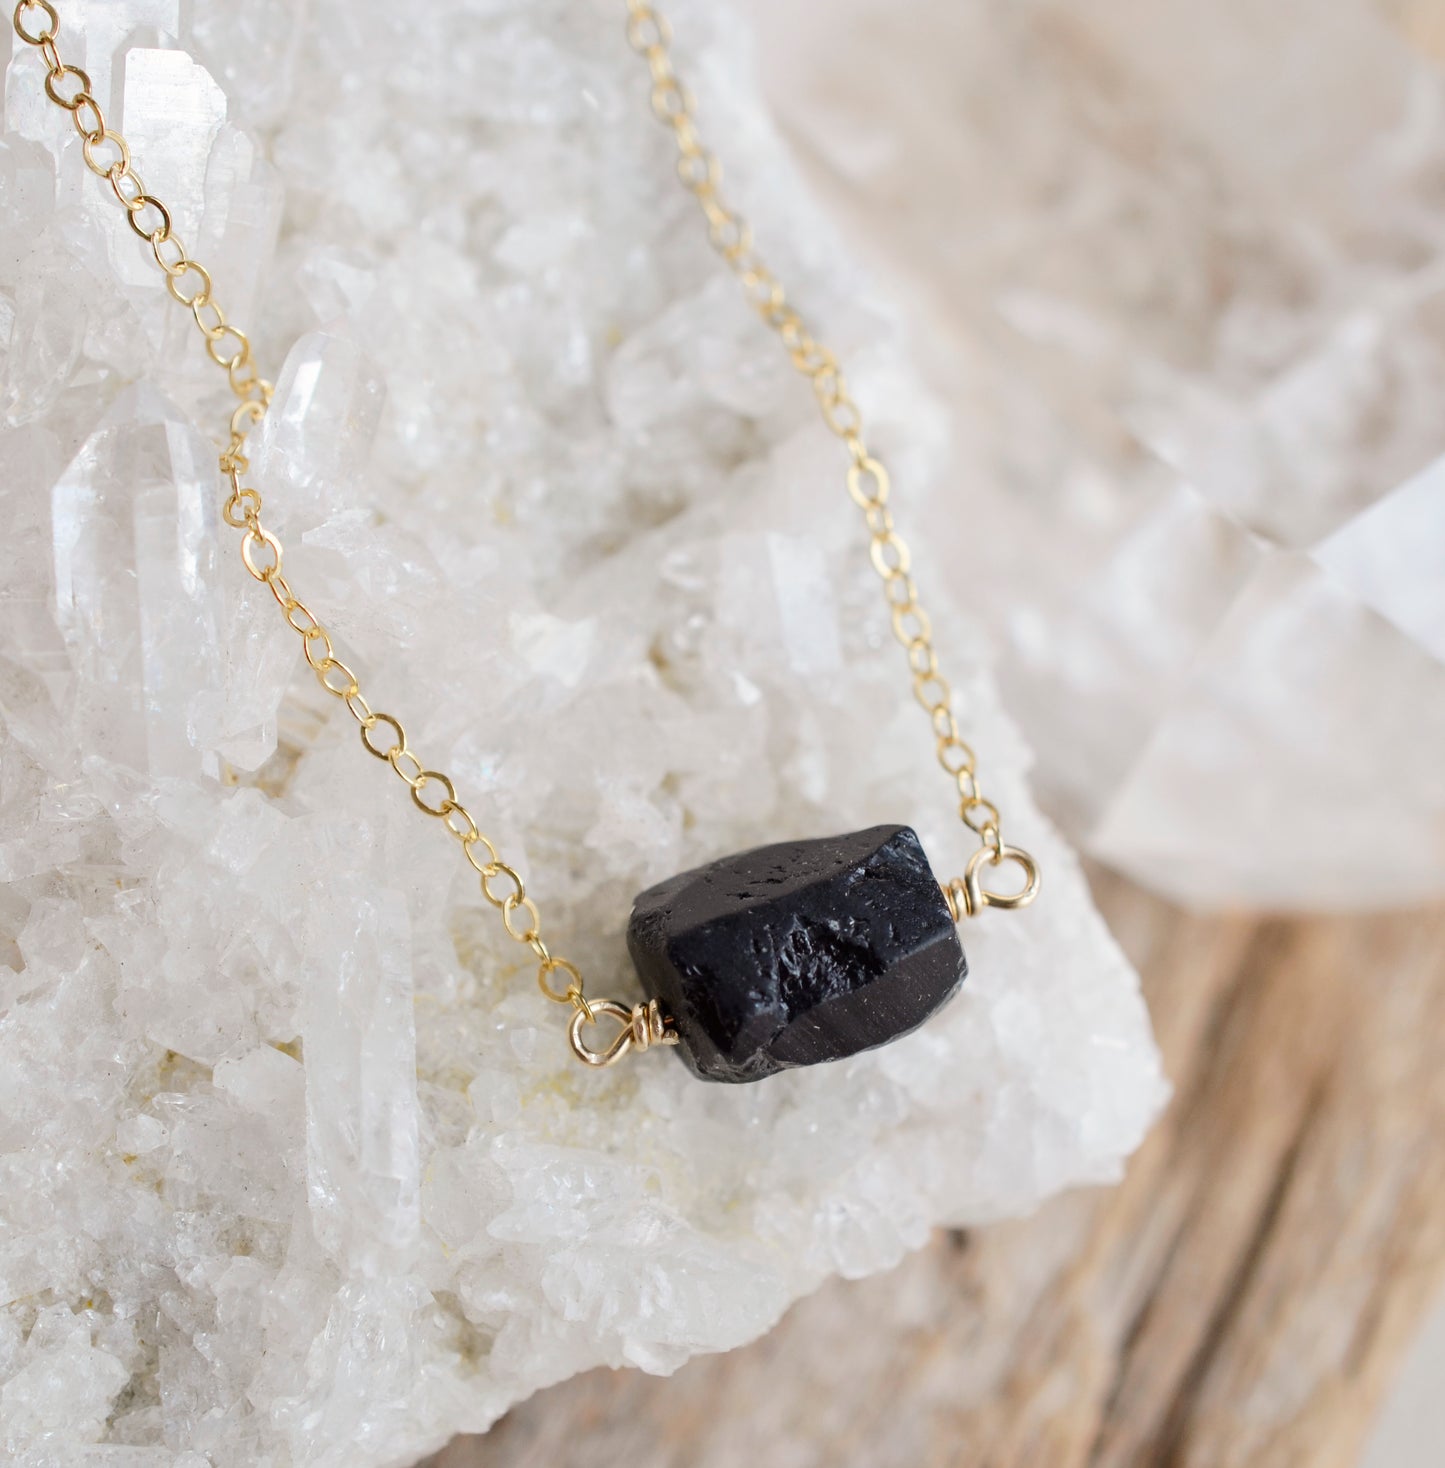 Raw Black Tourmaline Necklace, Sterling Silver, 14k Gold Filled, Black Tourmaline Necklace, Schorl Pendant, Protection Necklace, For Women